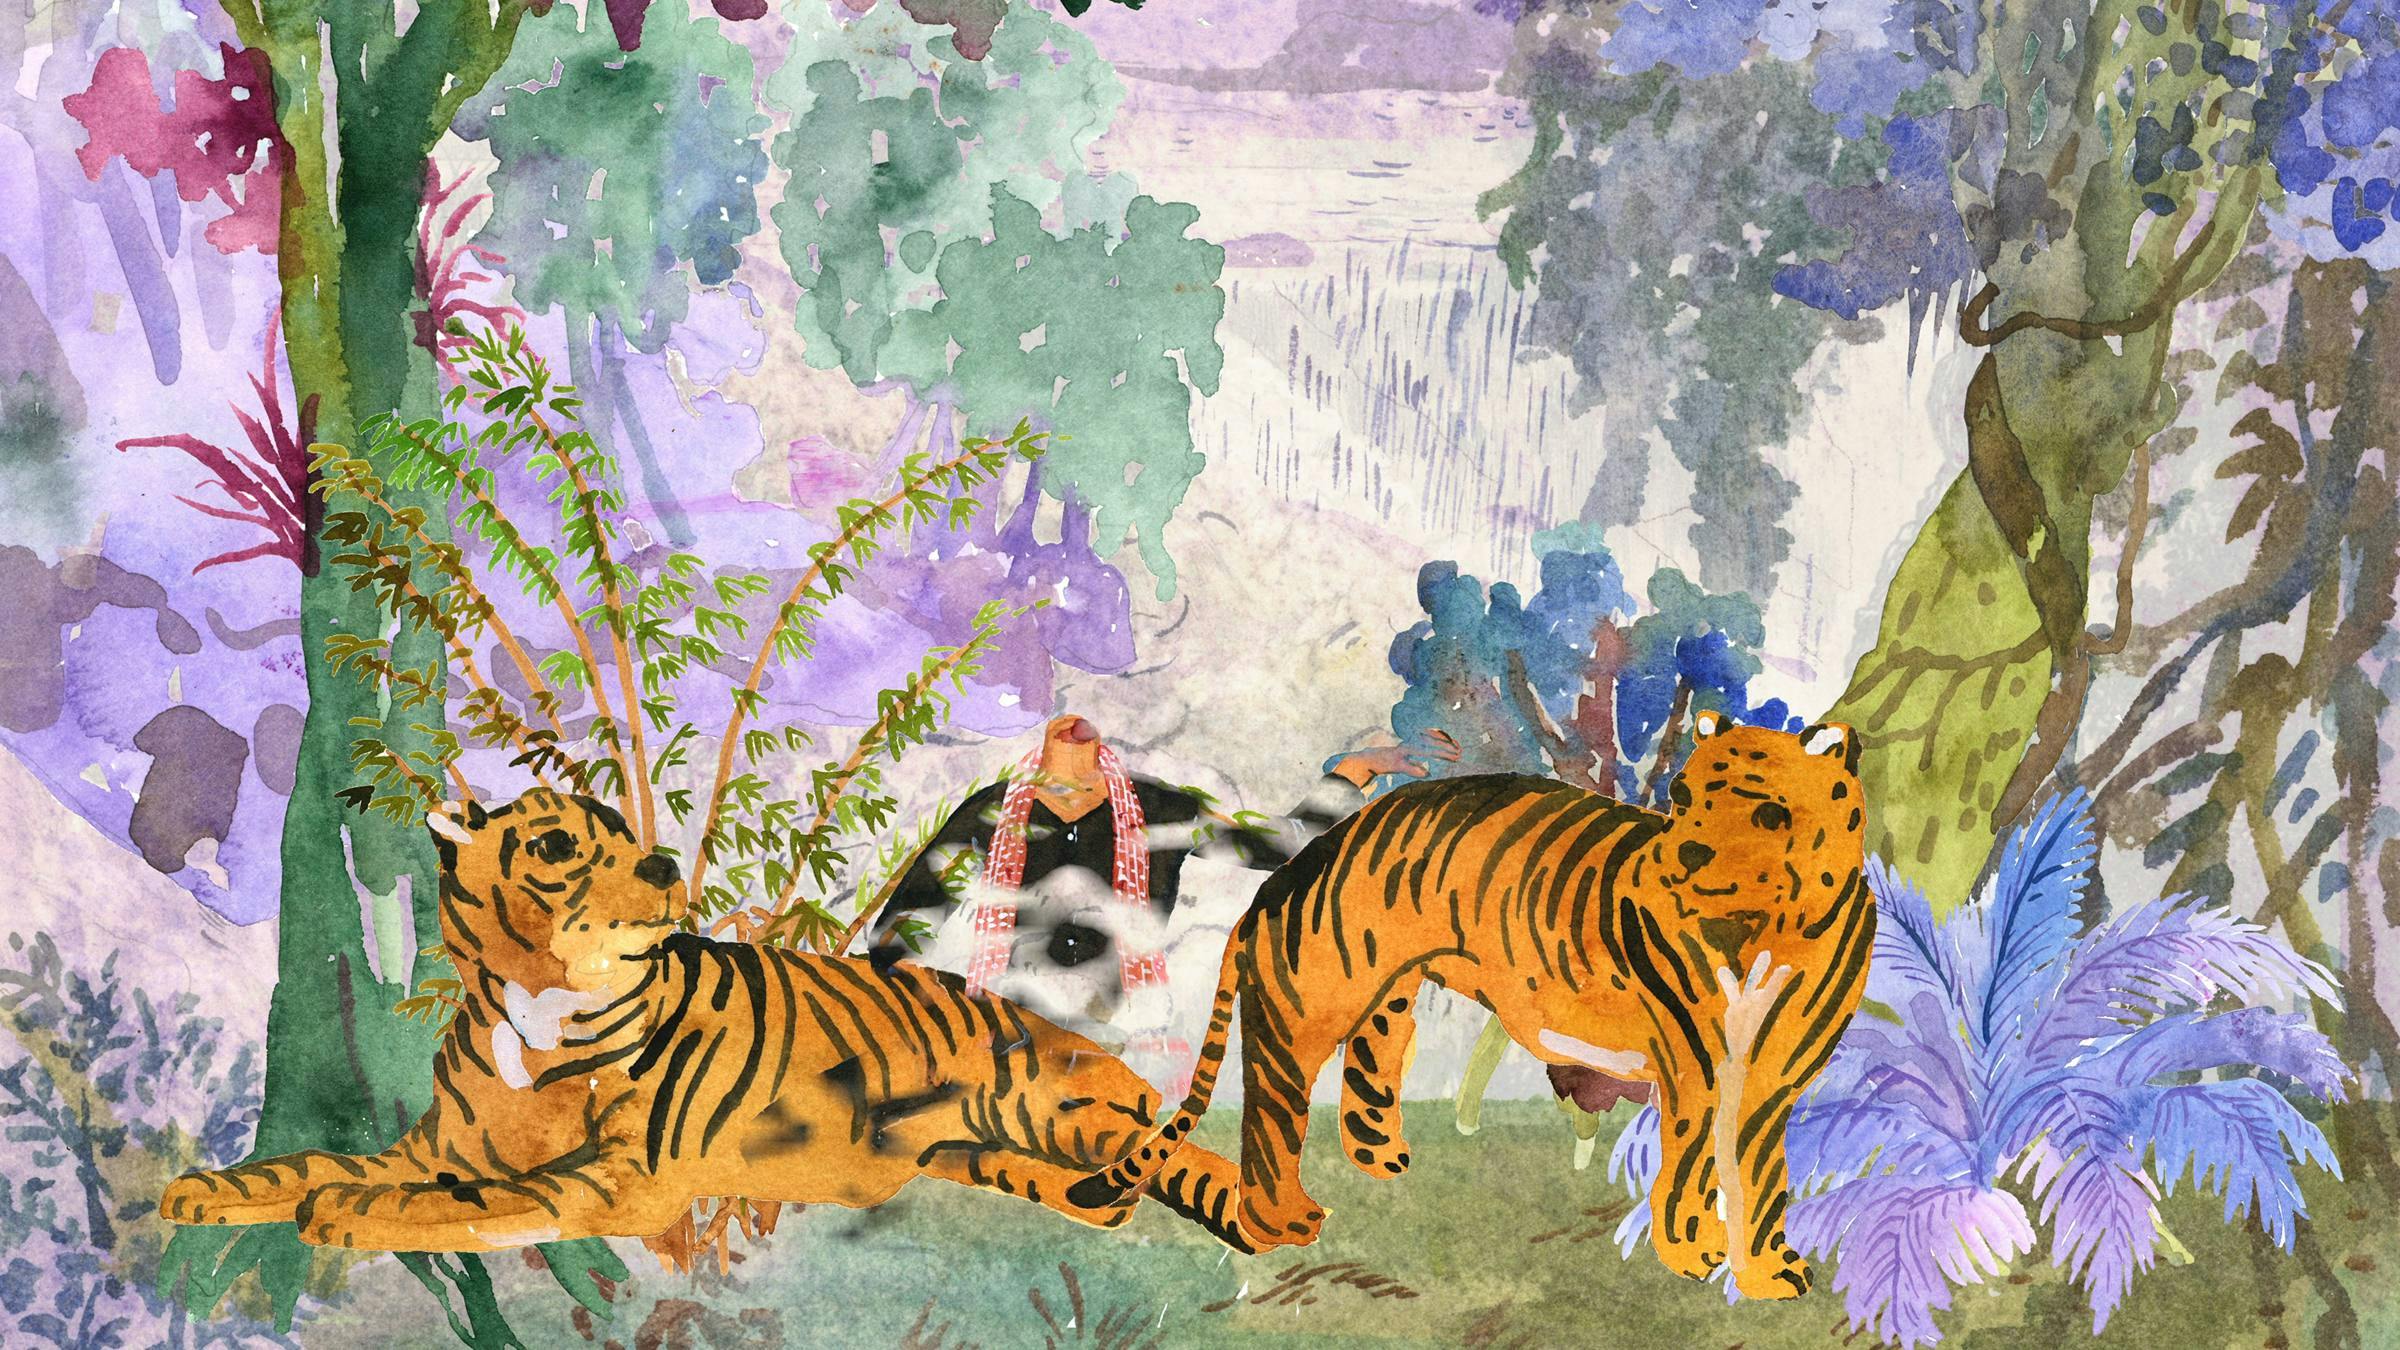 Image with watercolor quality of two tigers looking at one another with a human body without head sitting up in between them. They are in a leafy environment.